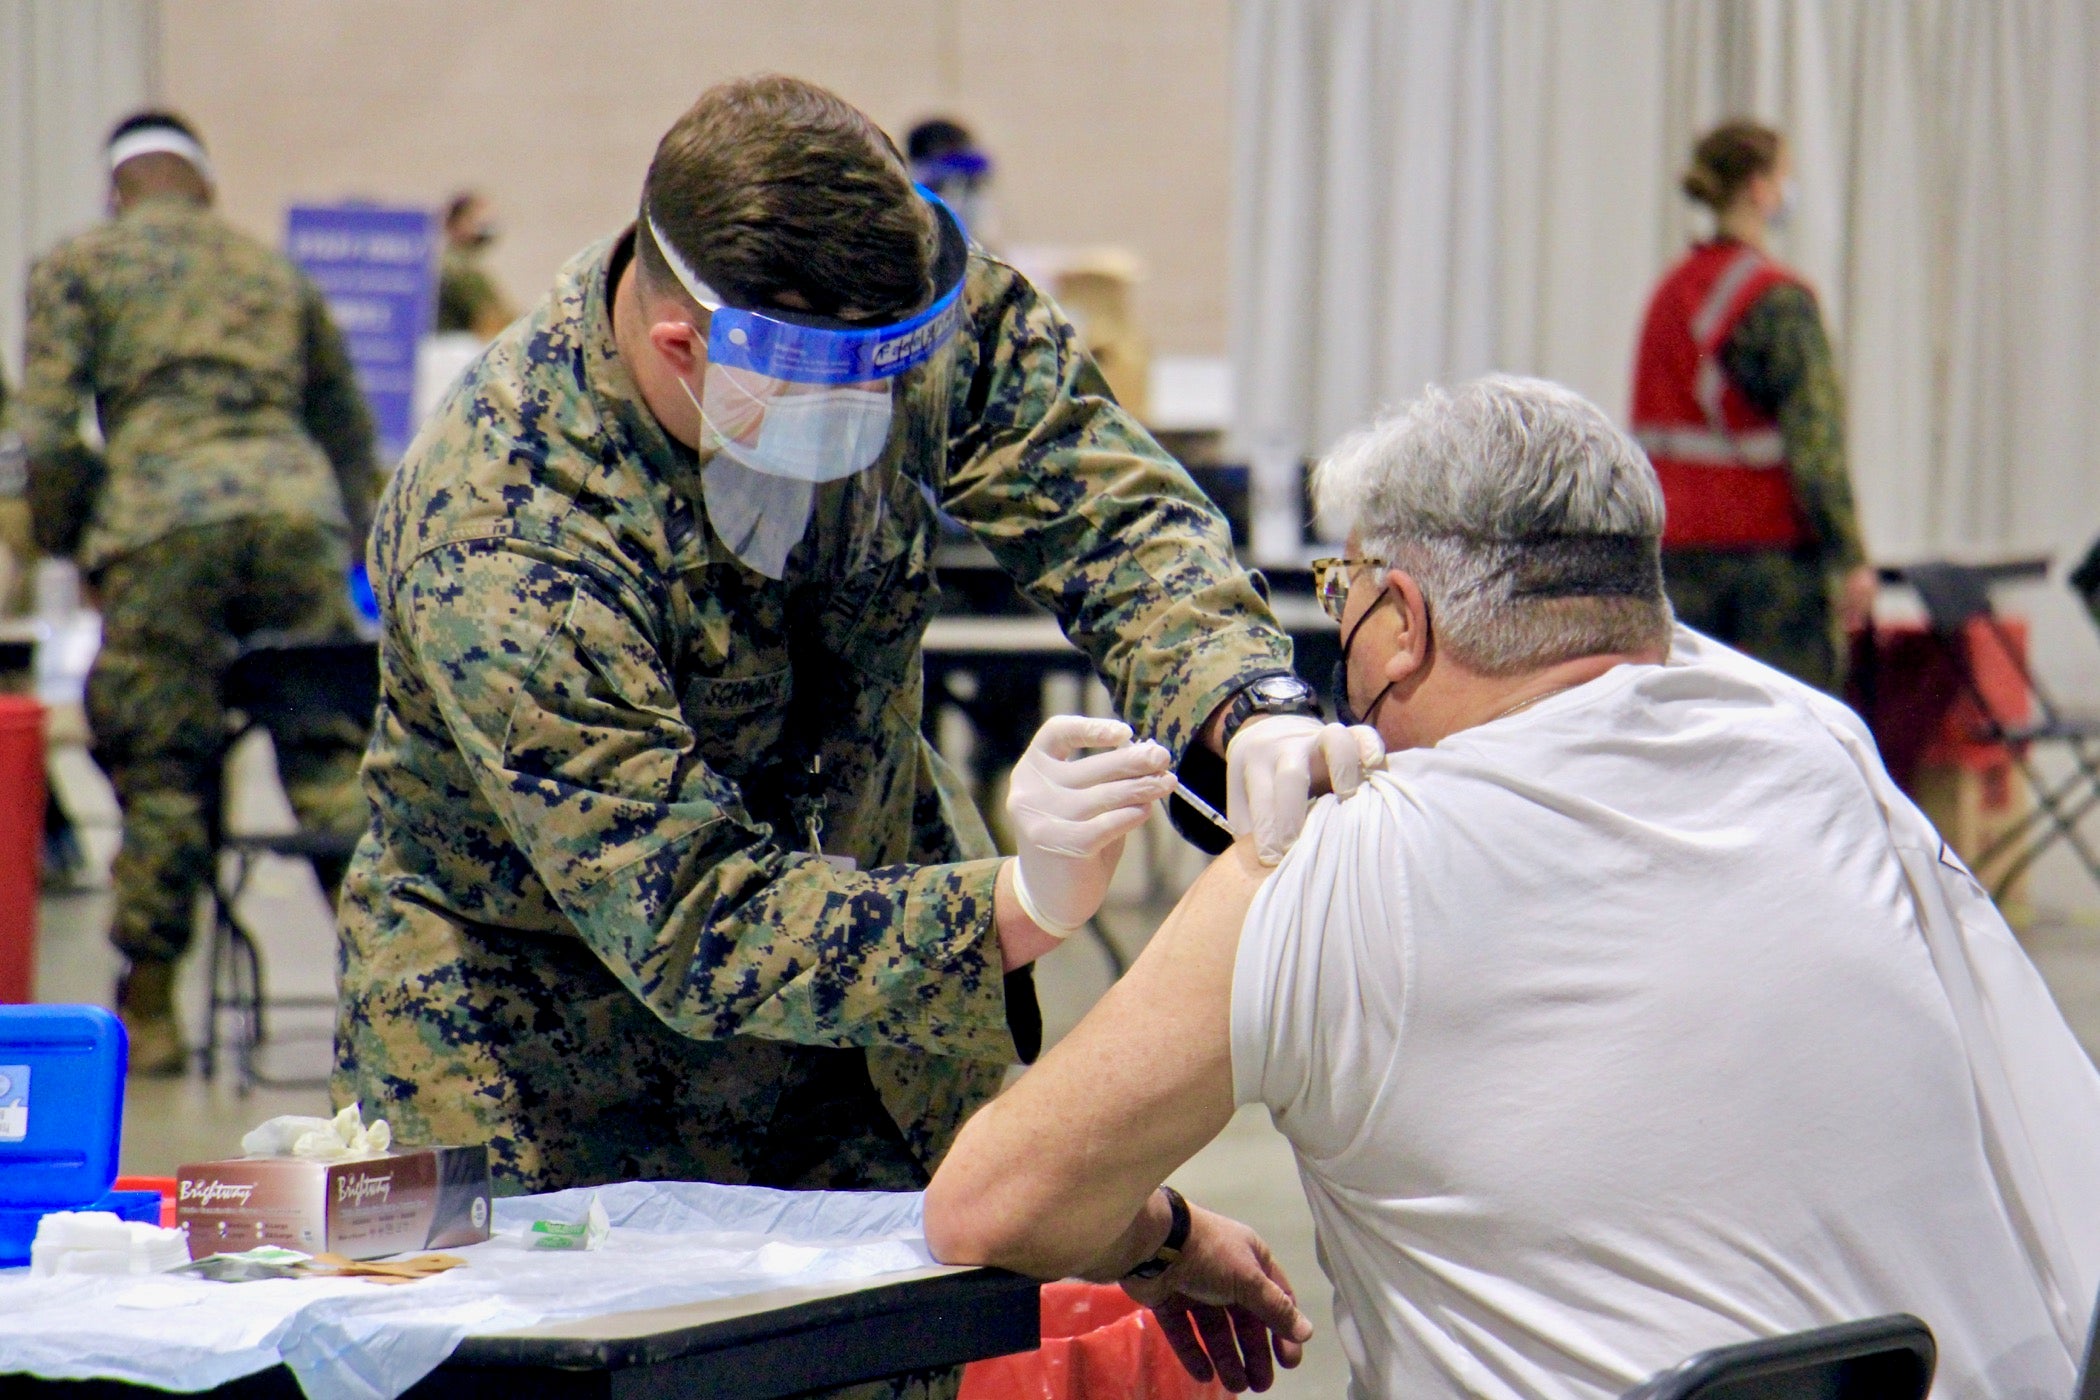 A National Guard member vaccinates someone against COVID-19 at the Pennsylvania Convention Center